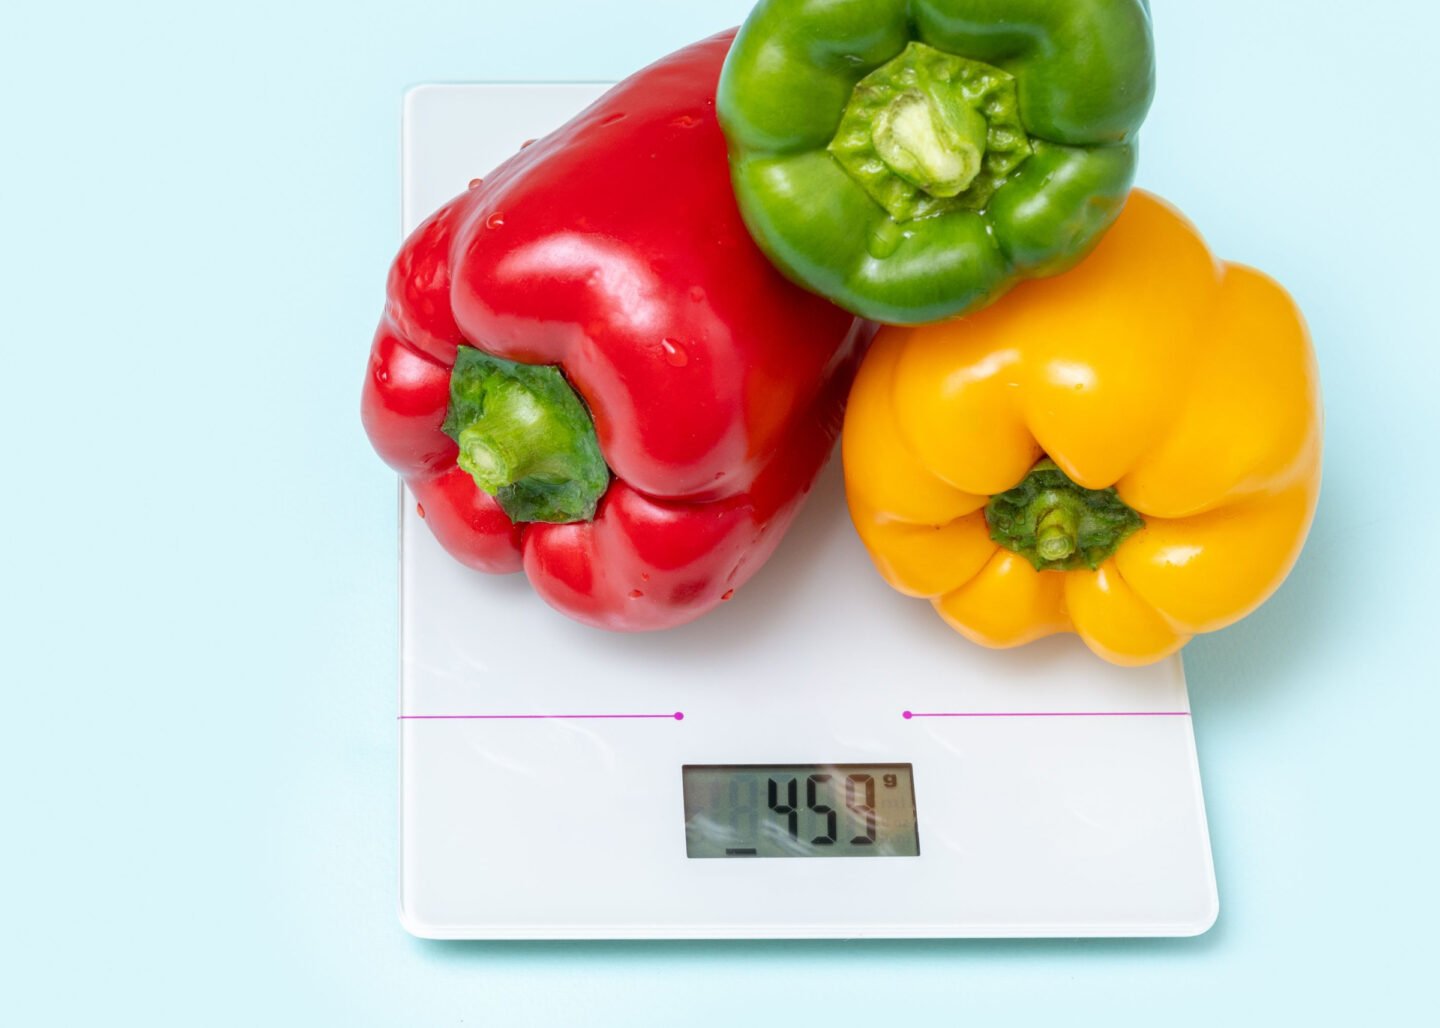 red yellow green bell peppers on a kitchen scale